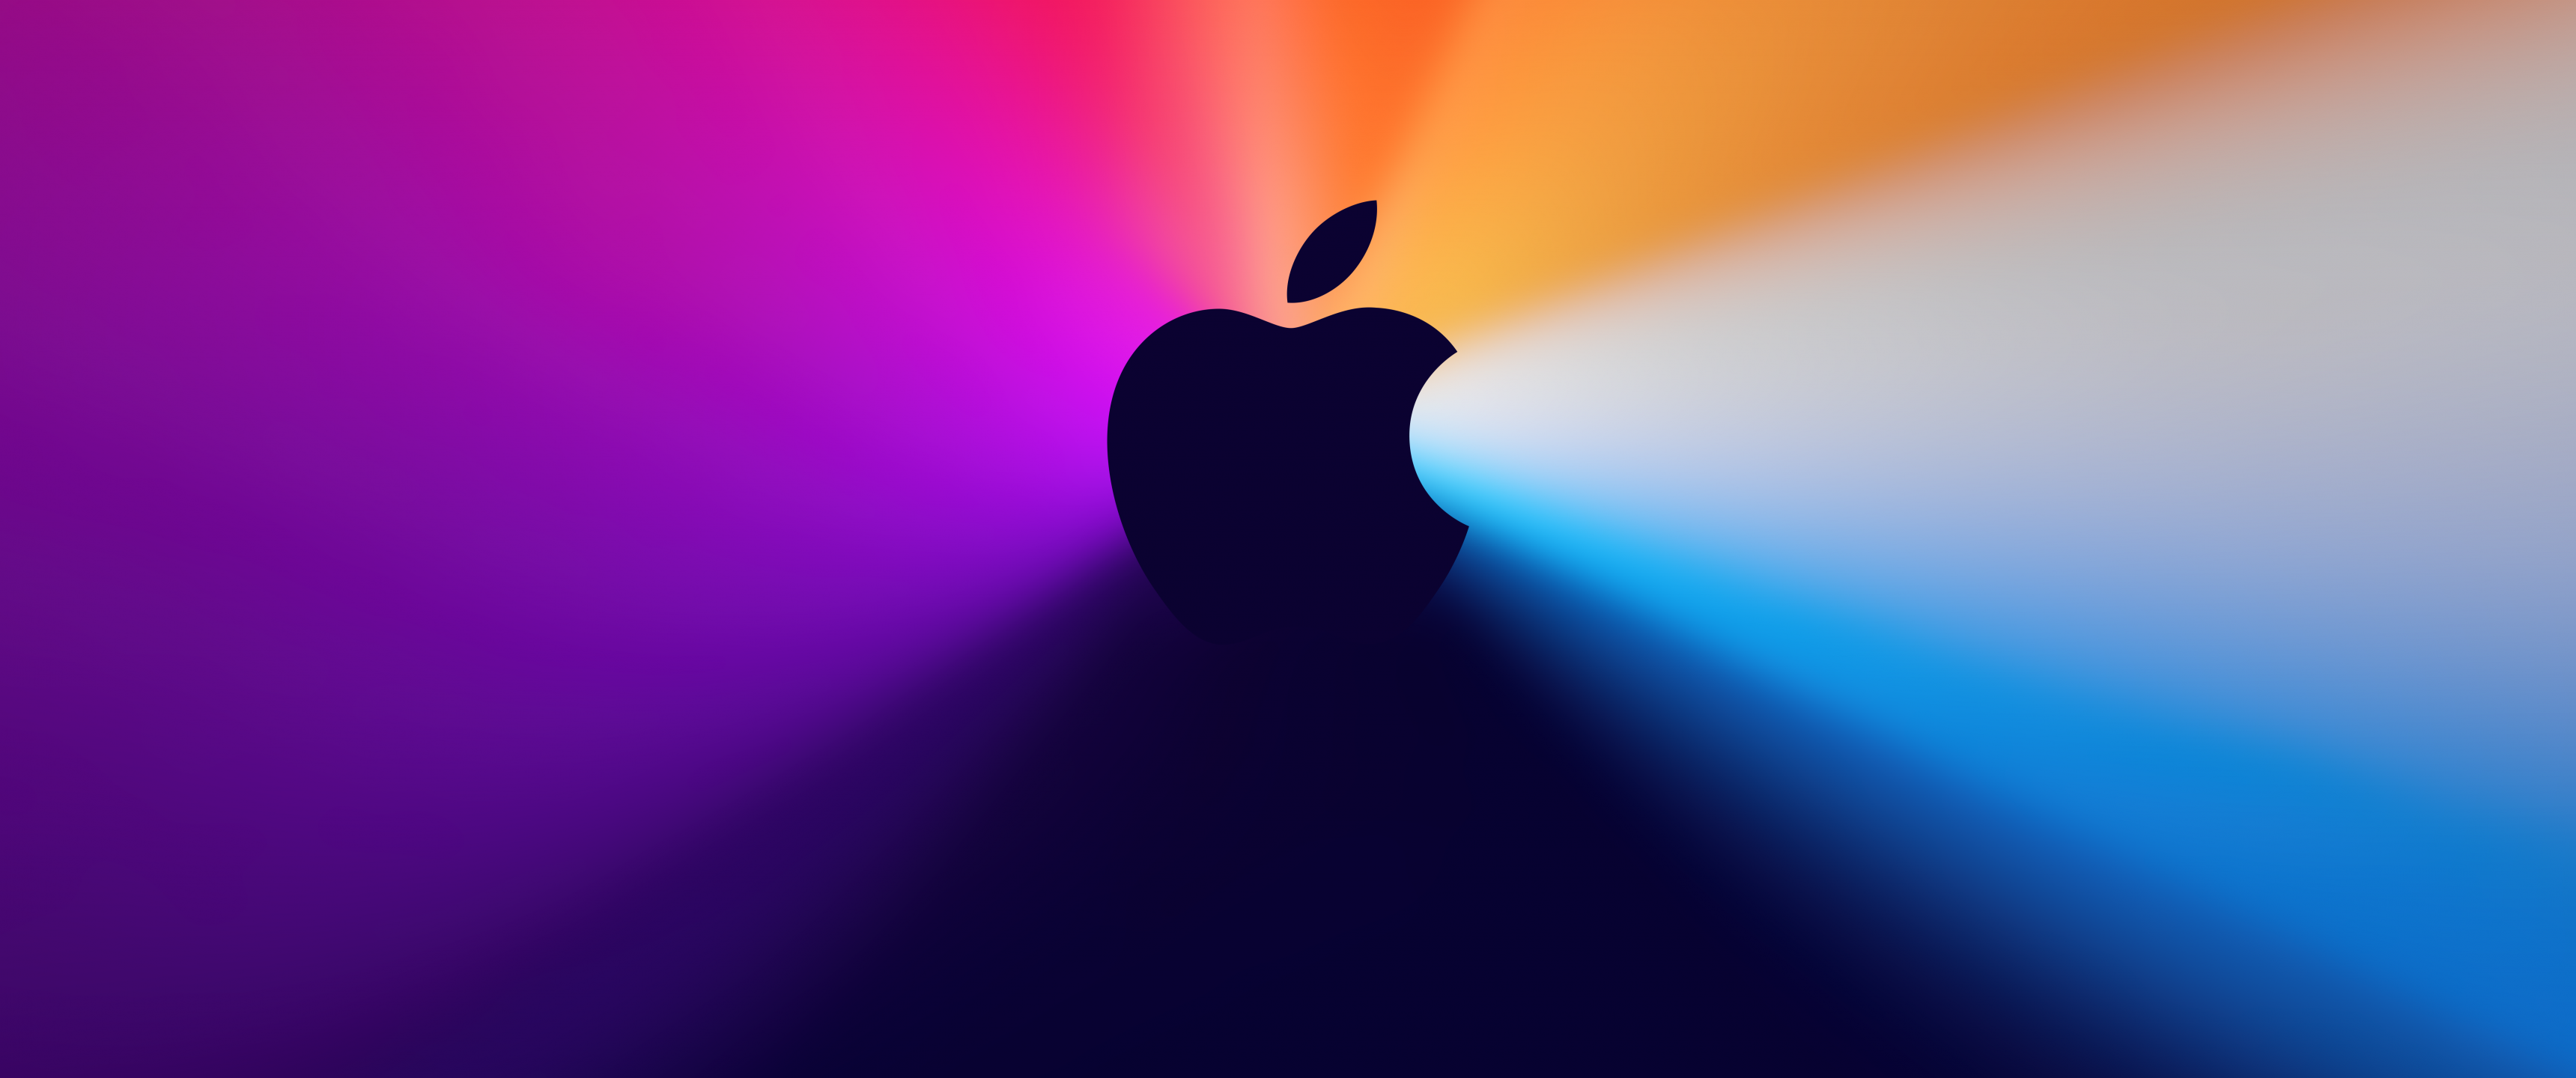 One more thing Wallpaper 4K, Apple logo, Gradient background, Apple Event, Technology